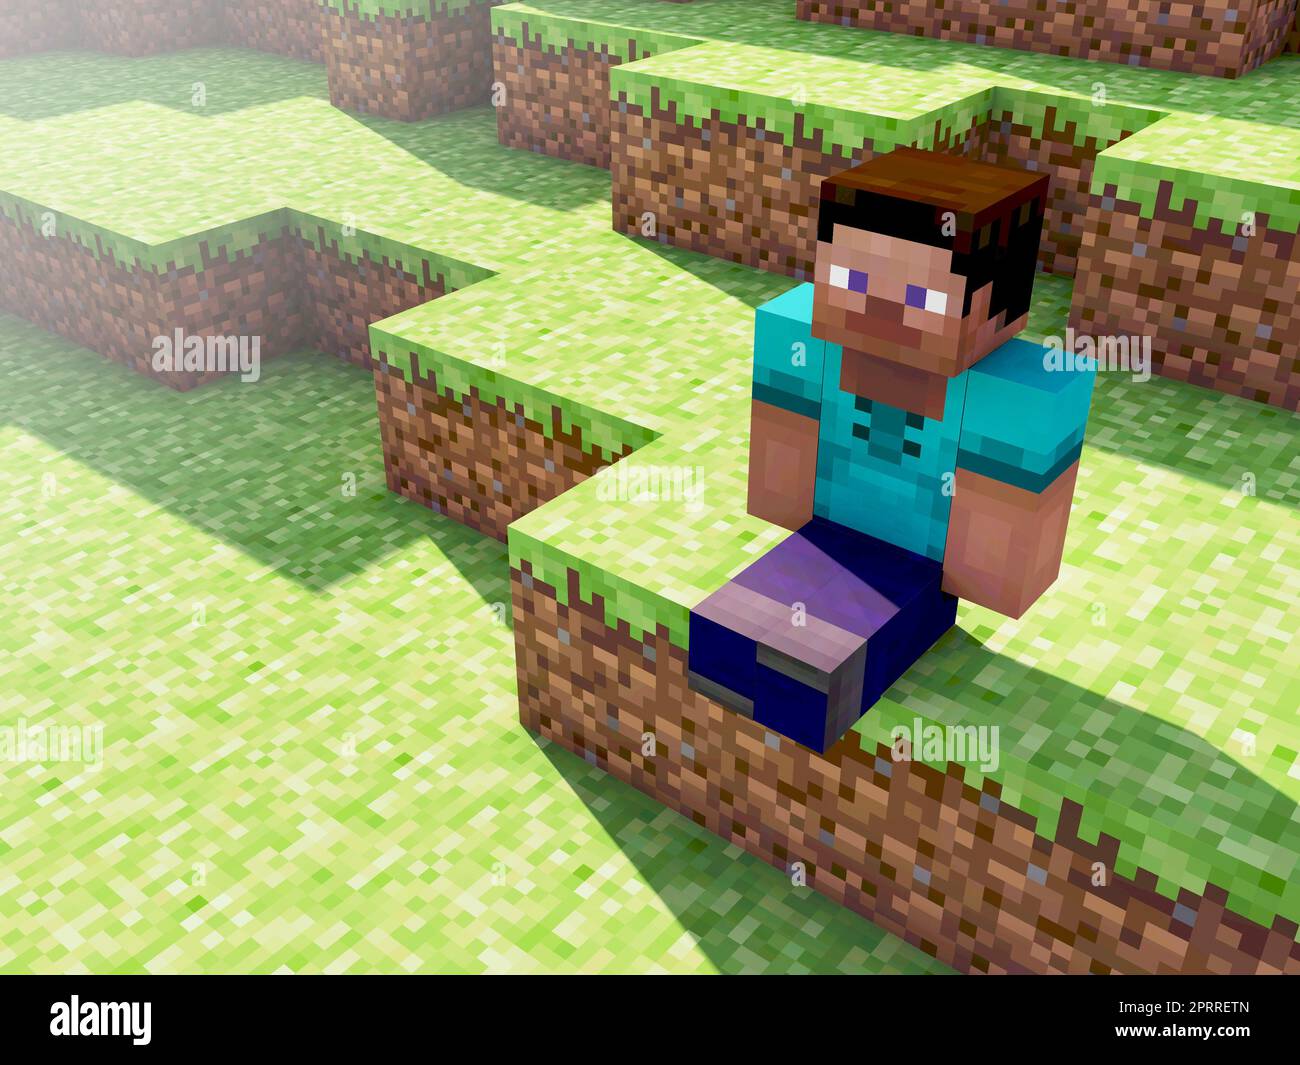 44 Minecraft Pocket Edition Gameplay Images, Stock Photos, 3D objects, &  Vectors